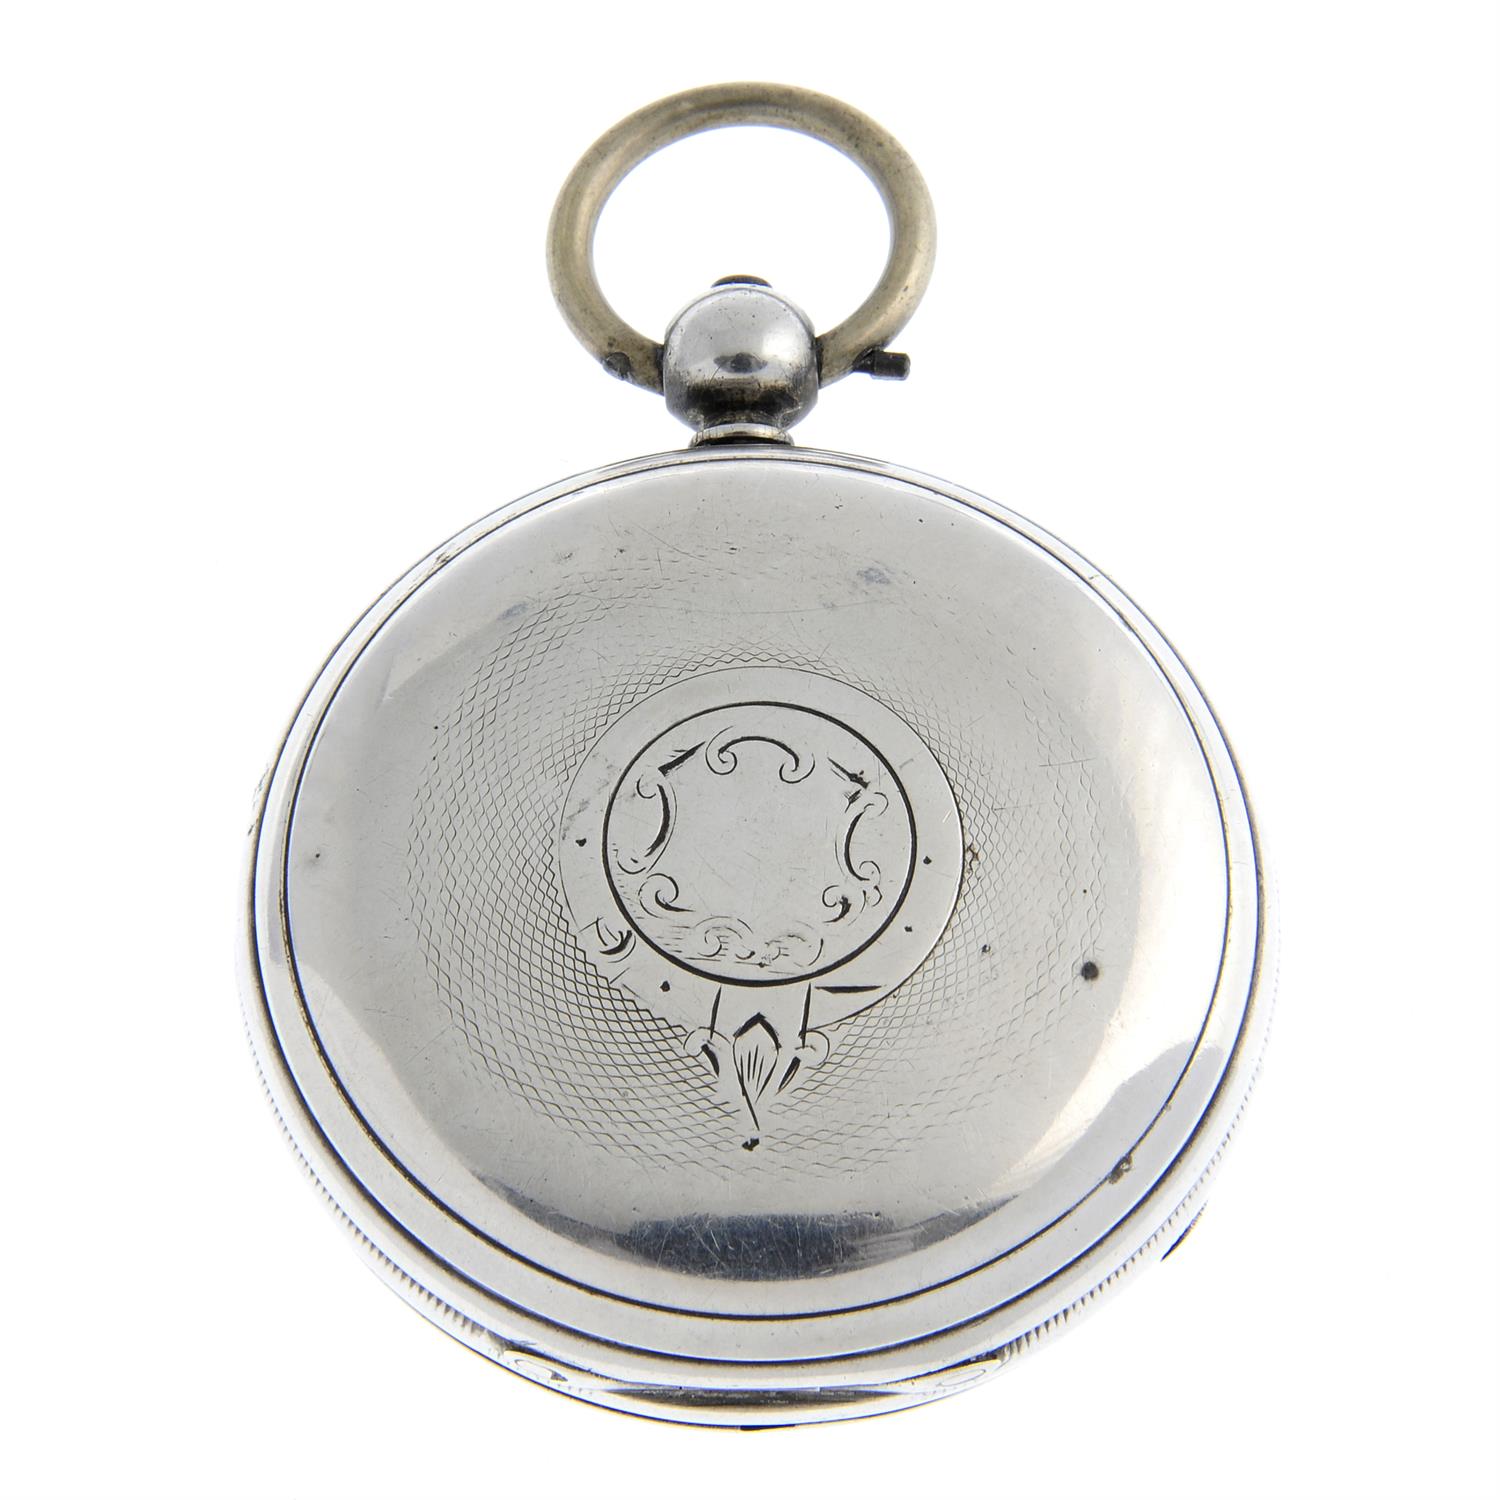 An open face pocket watch, 53mm. - Image 2 of 3